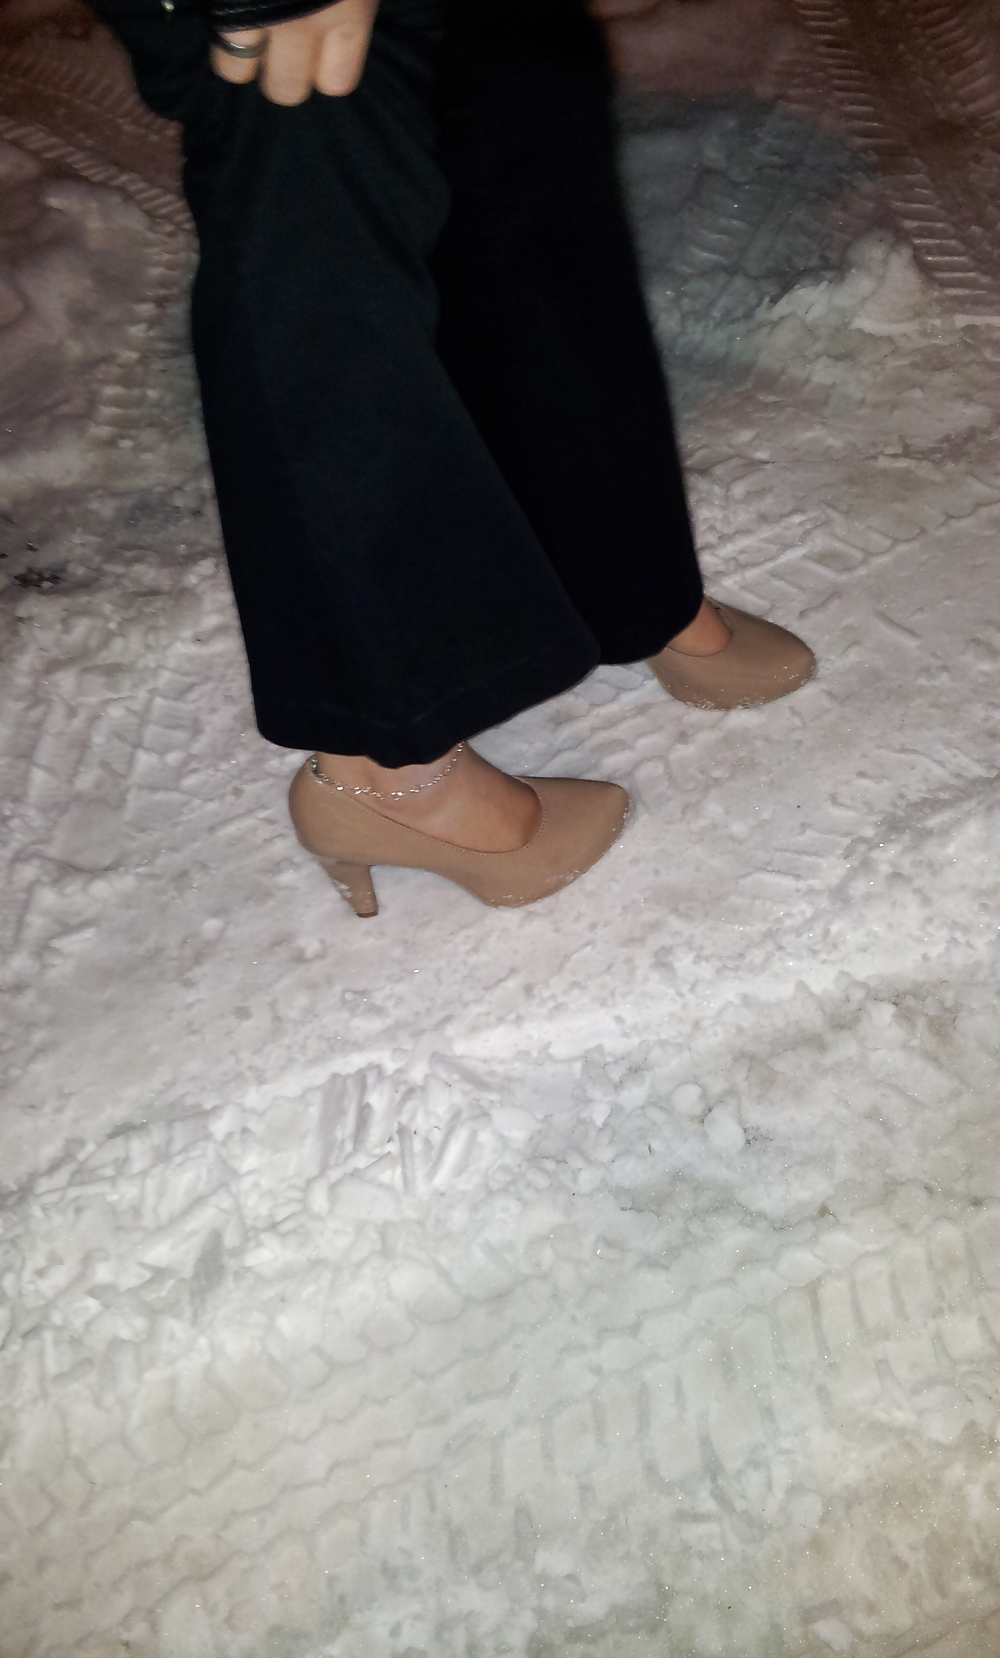 Wife heels in the snow without pantyhose!!! #15112254